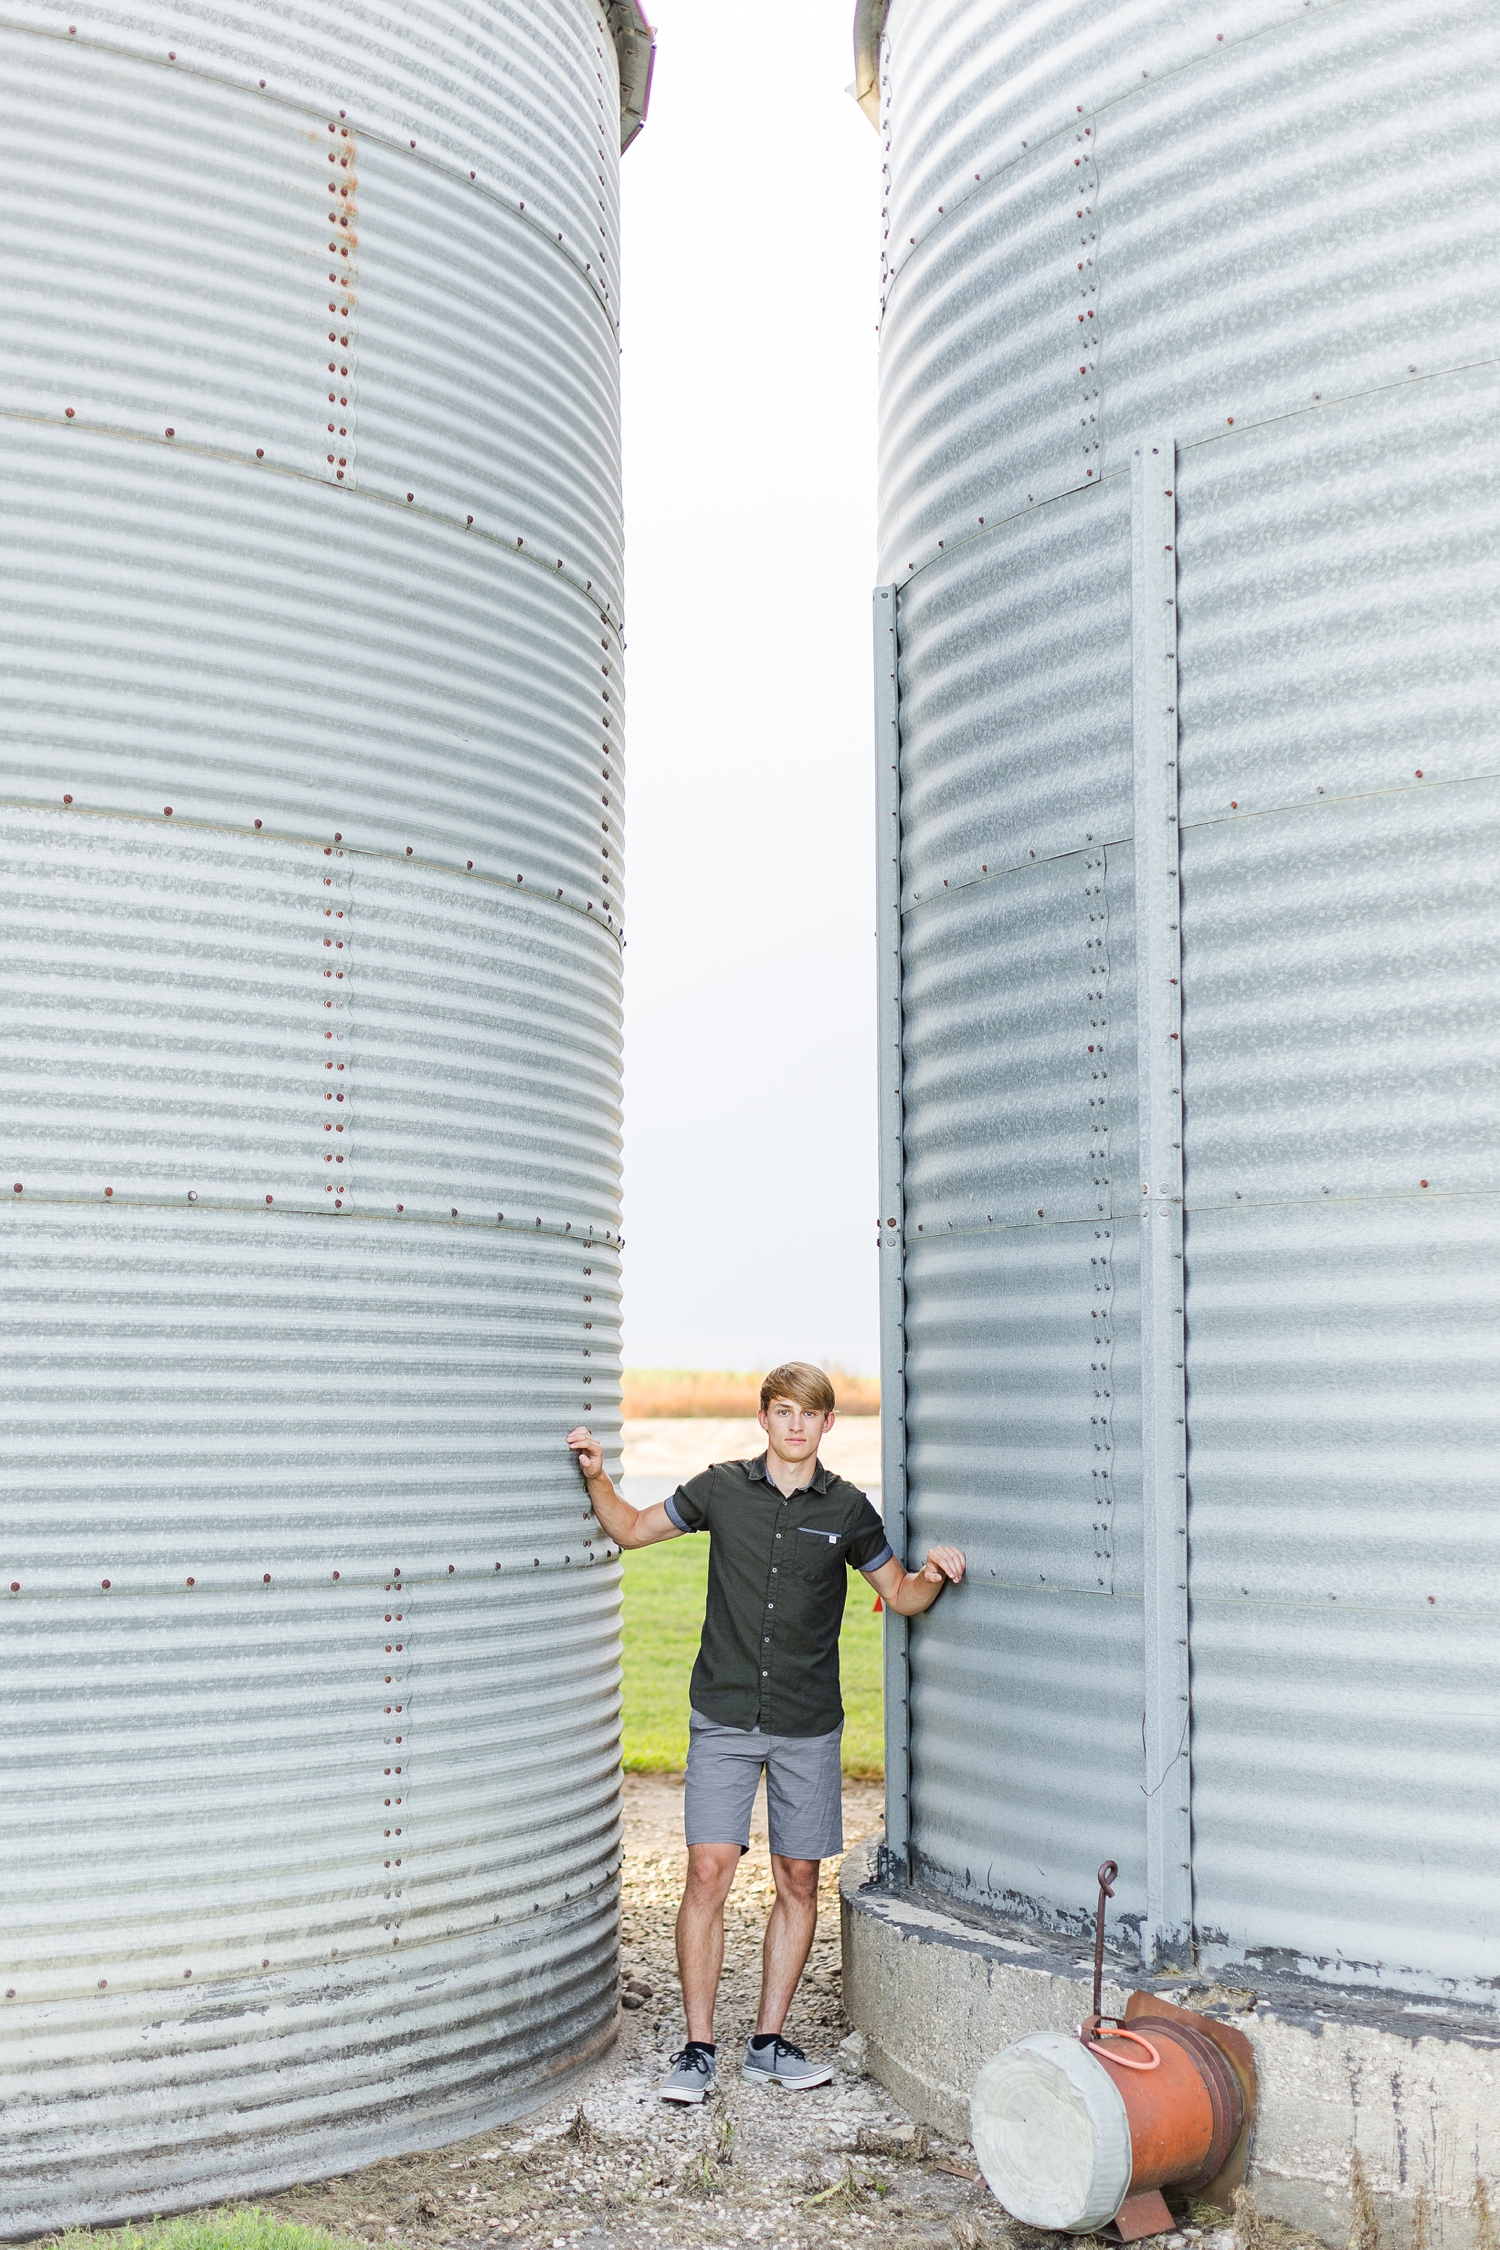 Aidan stands in between two grain bins while pushing his arms against the walls | CB Studio